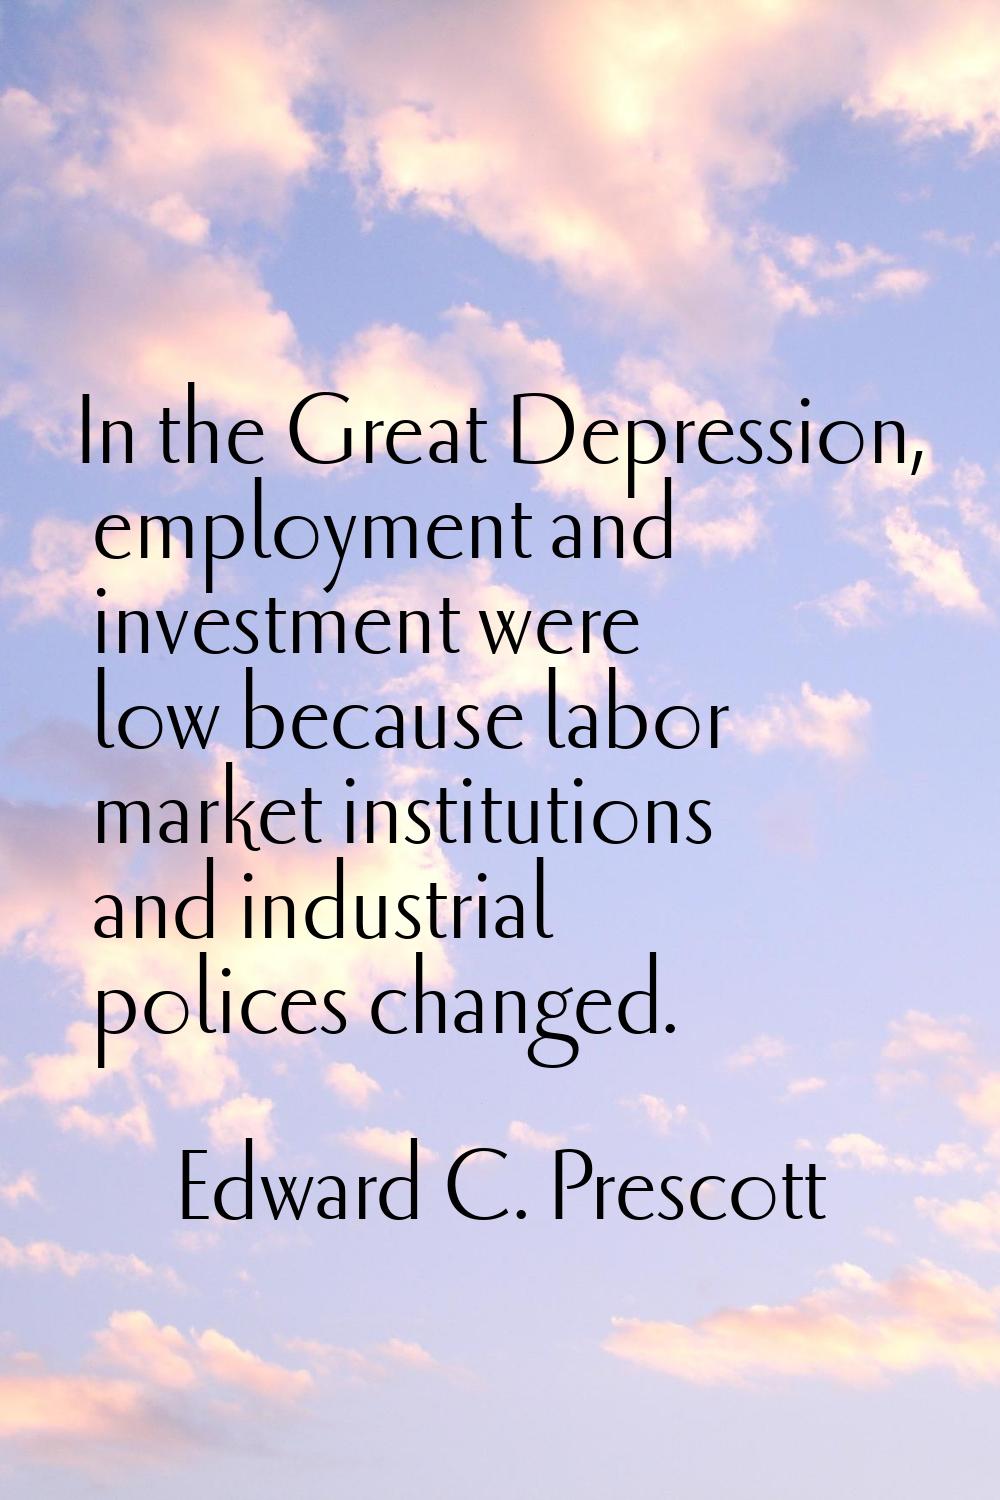 In the Great Depression, employment and investment were low because labor market institutions and i